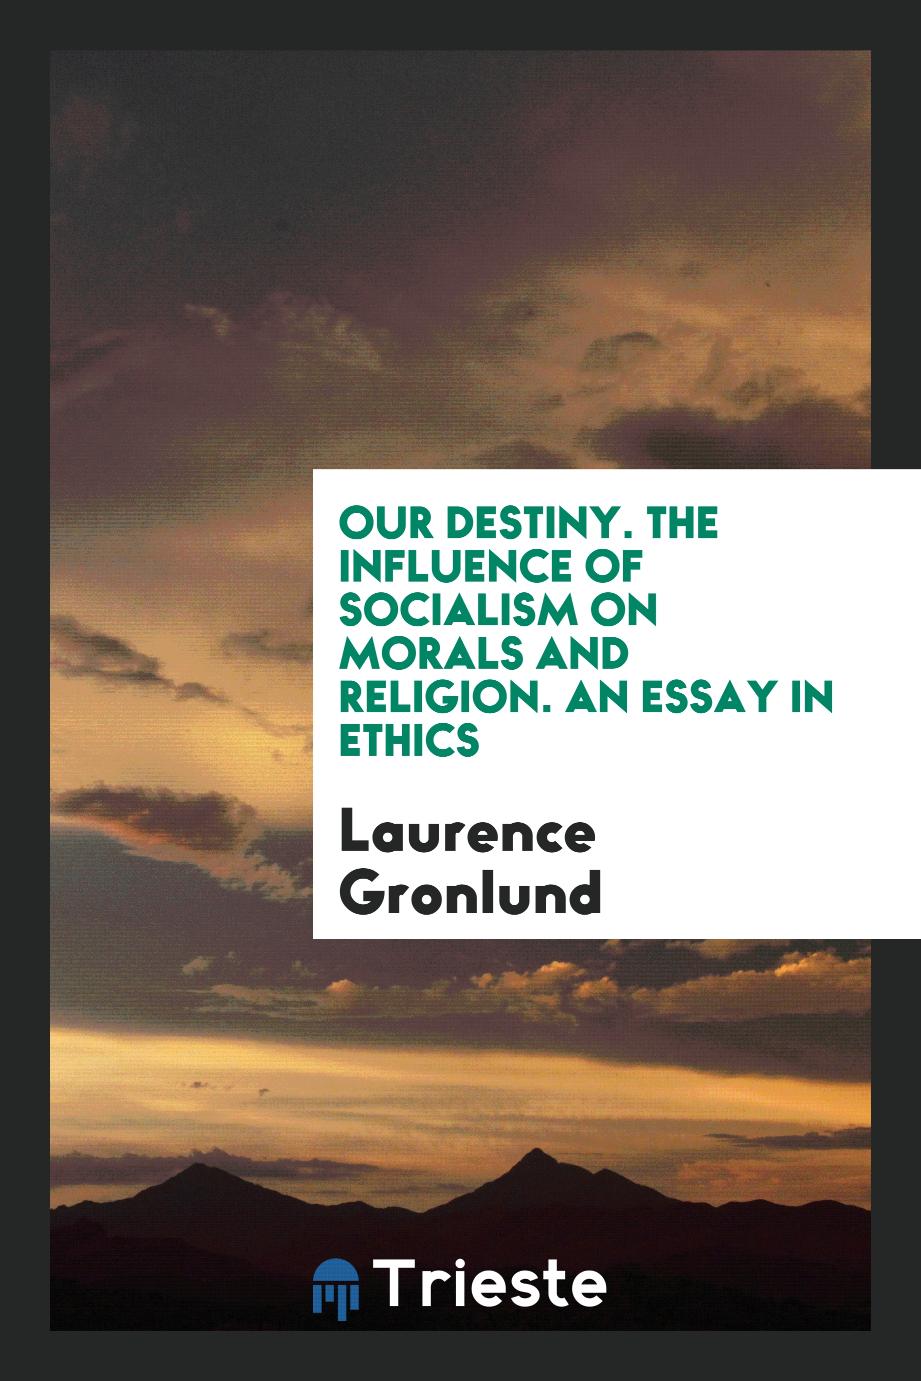 Our Destiny. The Influence of Socialism on Morals and Religion. An Essay in Ethics